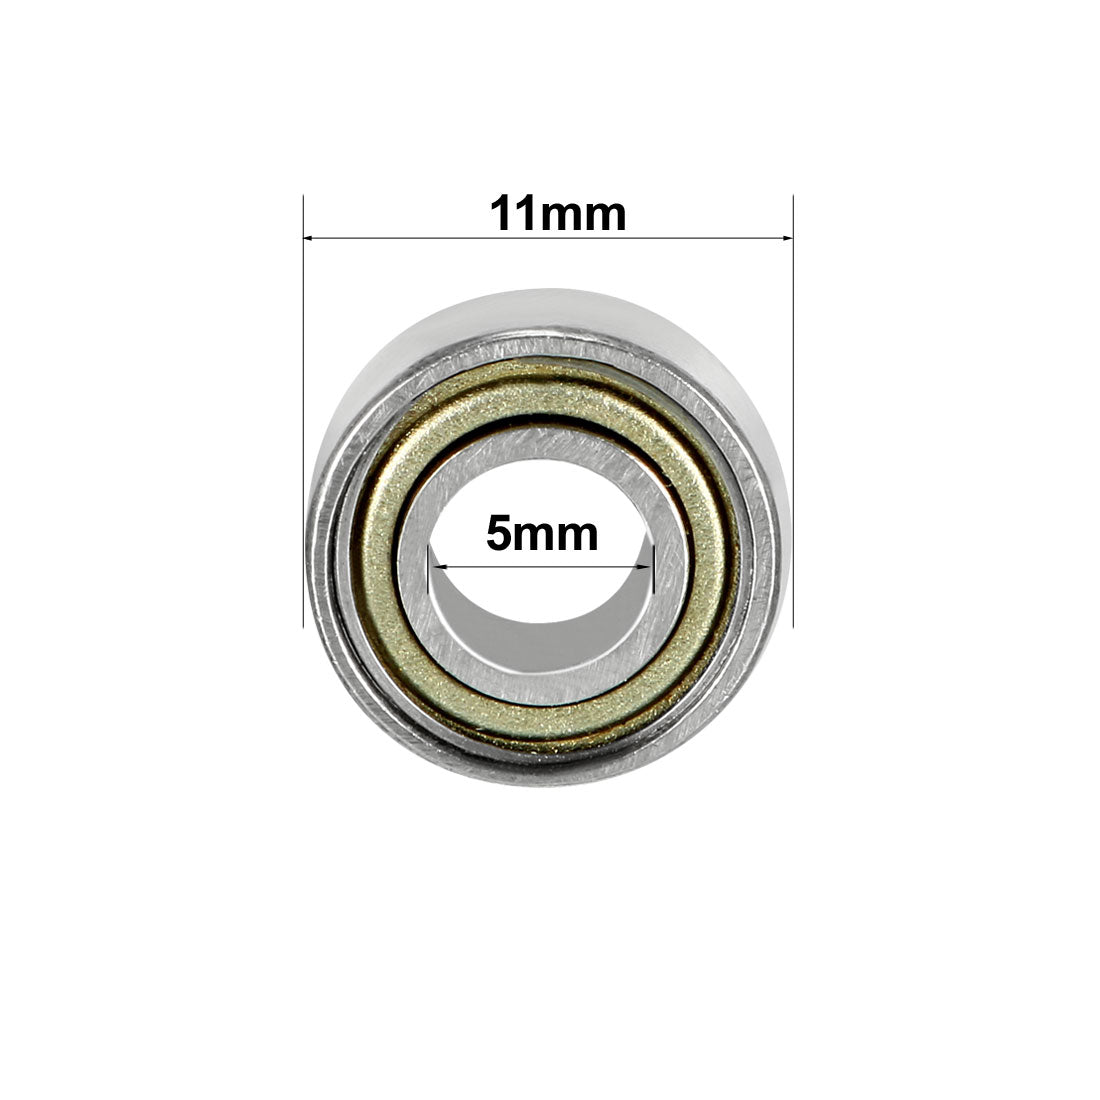 uxcell Uxcell Deep Groove Ball Bearings Metric Double Shielded Carbon Steel Z1 Level